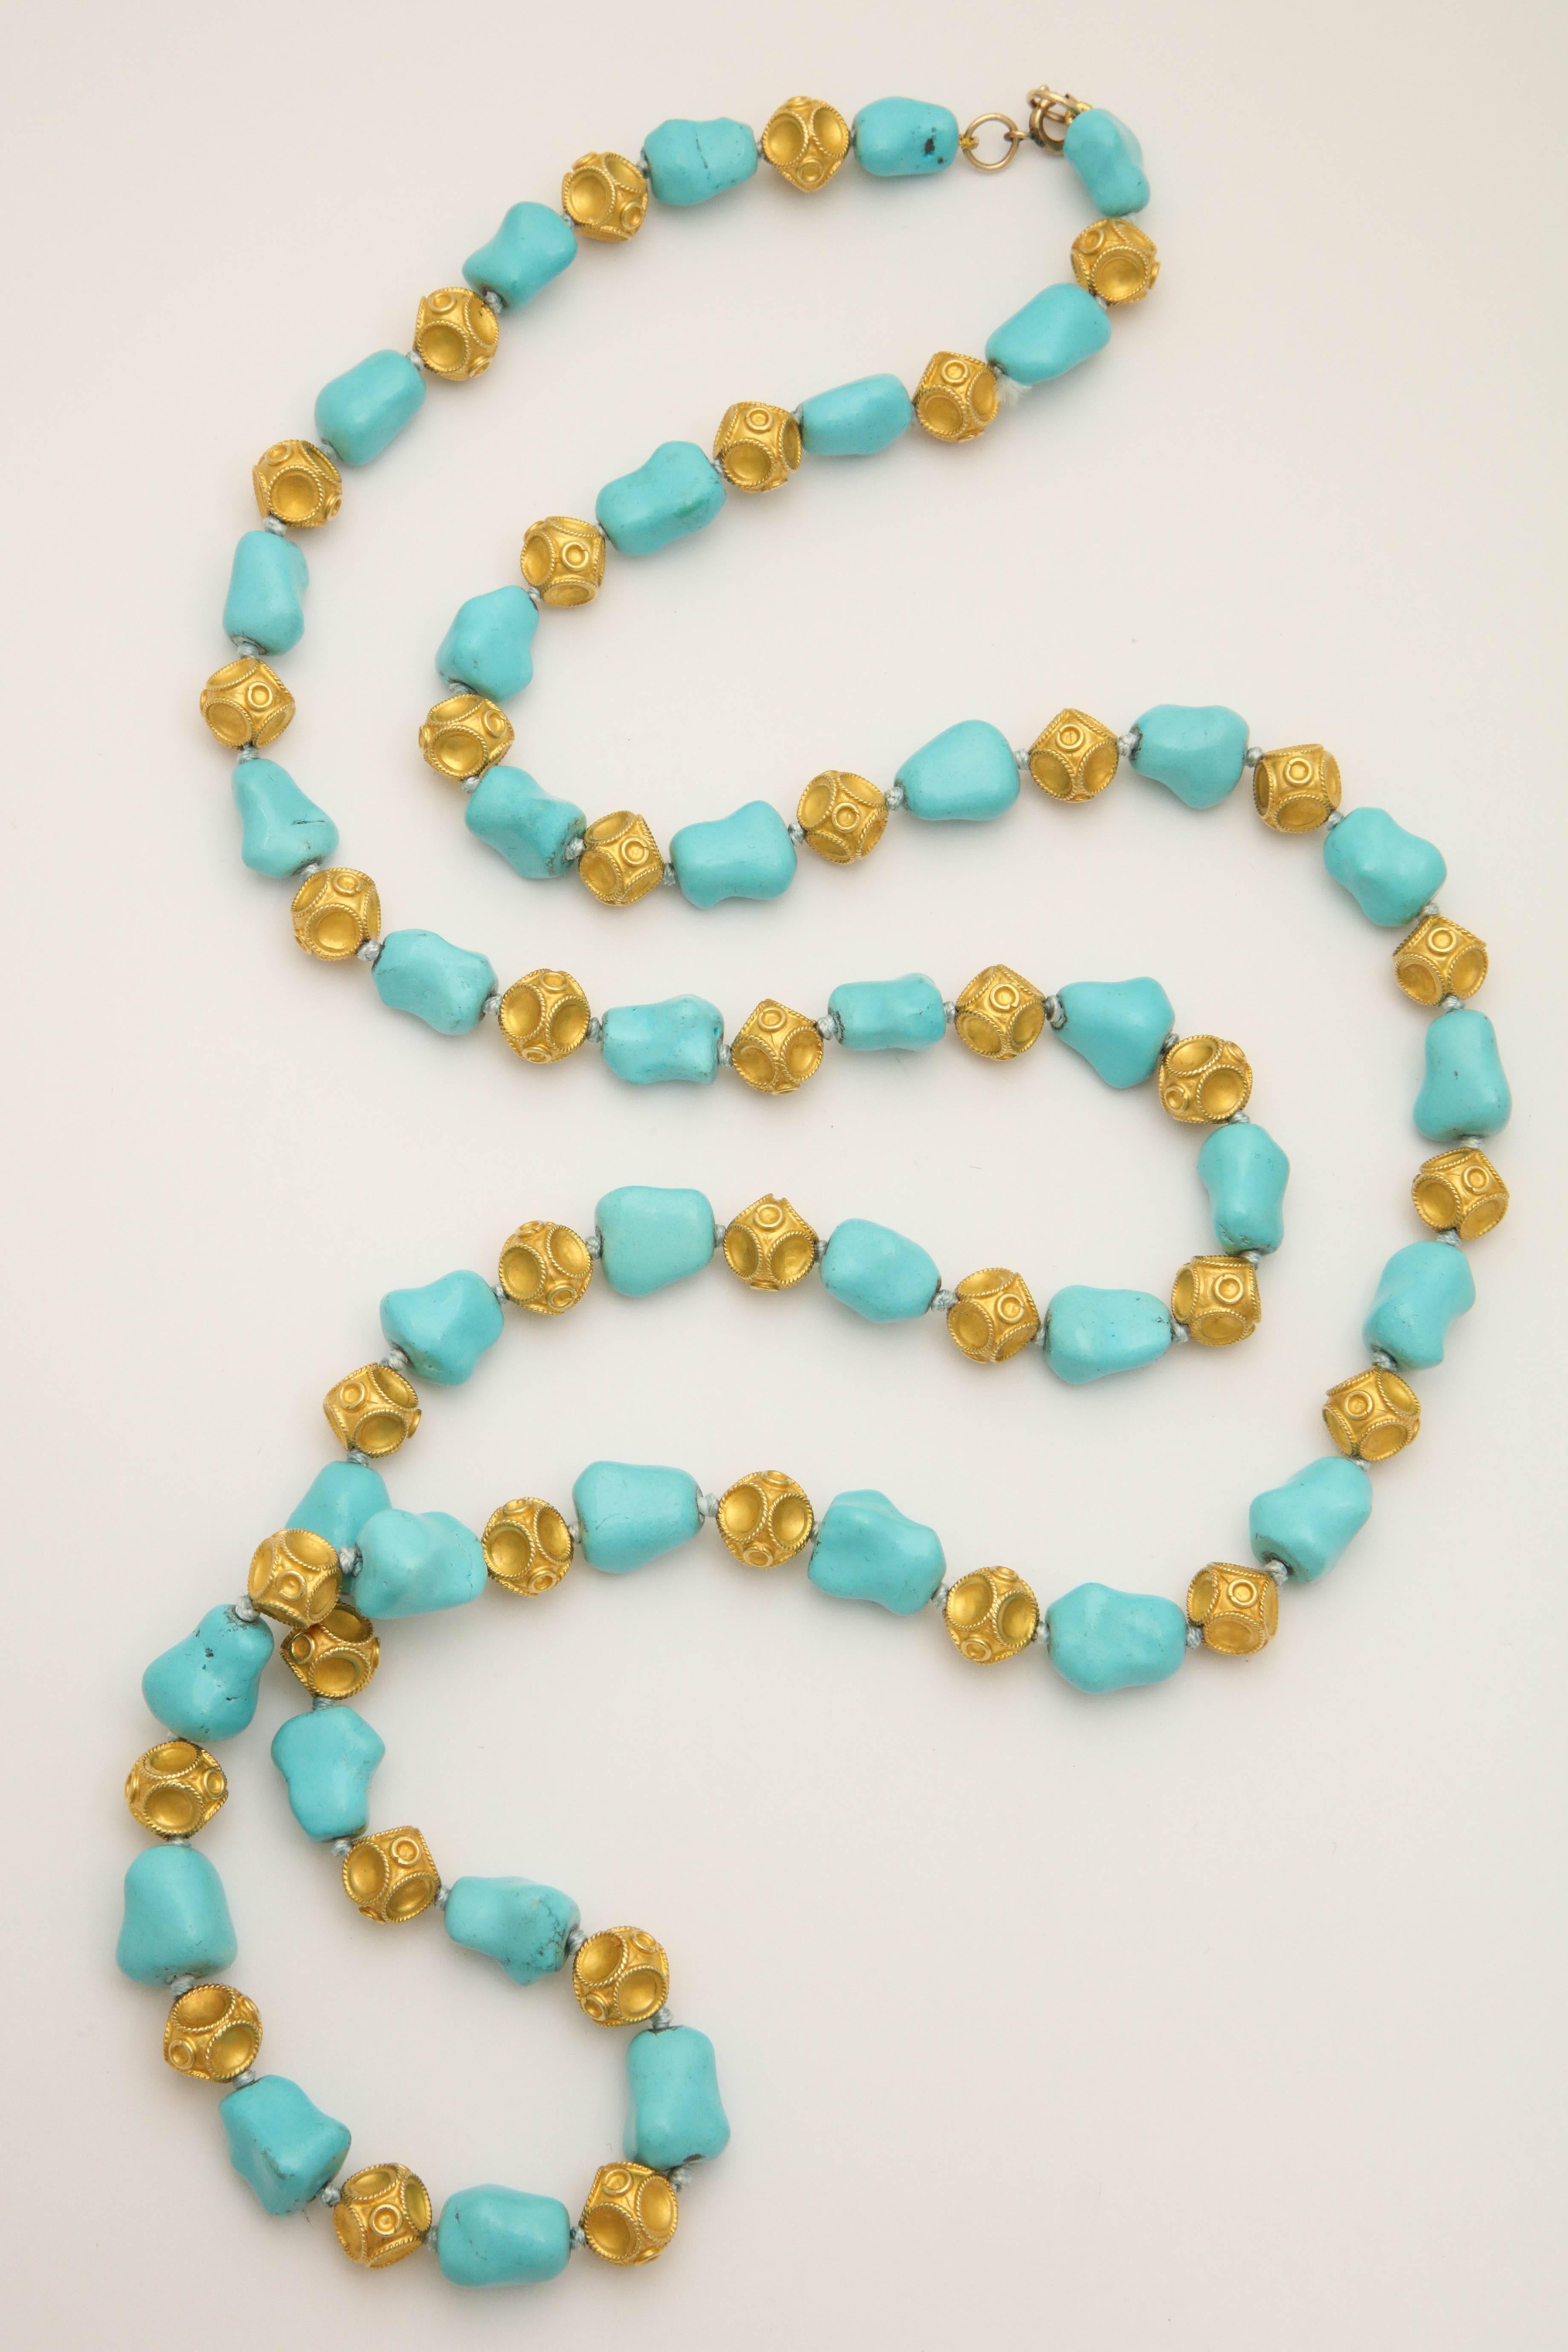 One 18kt Yellow Gold Alternating Turquoise Nugget Pieces With 18kt Yellow Gold Crater Design Ball Pieces To Form A 40 Inches Long Chain Necklace. Note: Necklace May Be Worn Doubled To Form Two 20 inch Necklace Length Chains.Easy To Open And Close